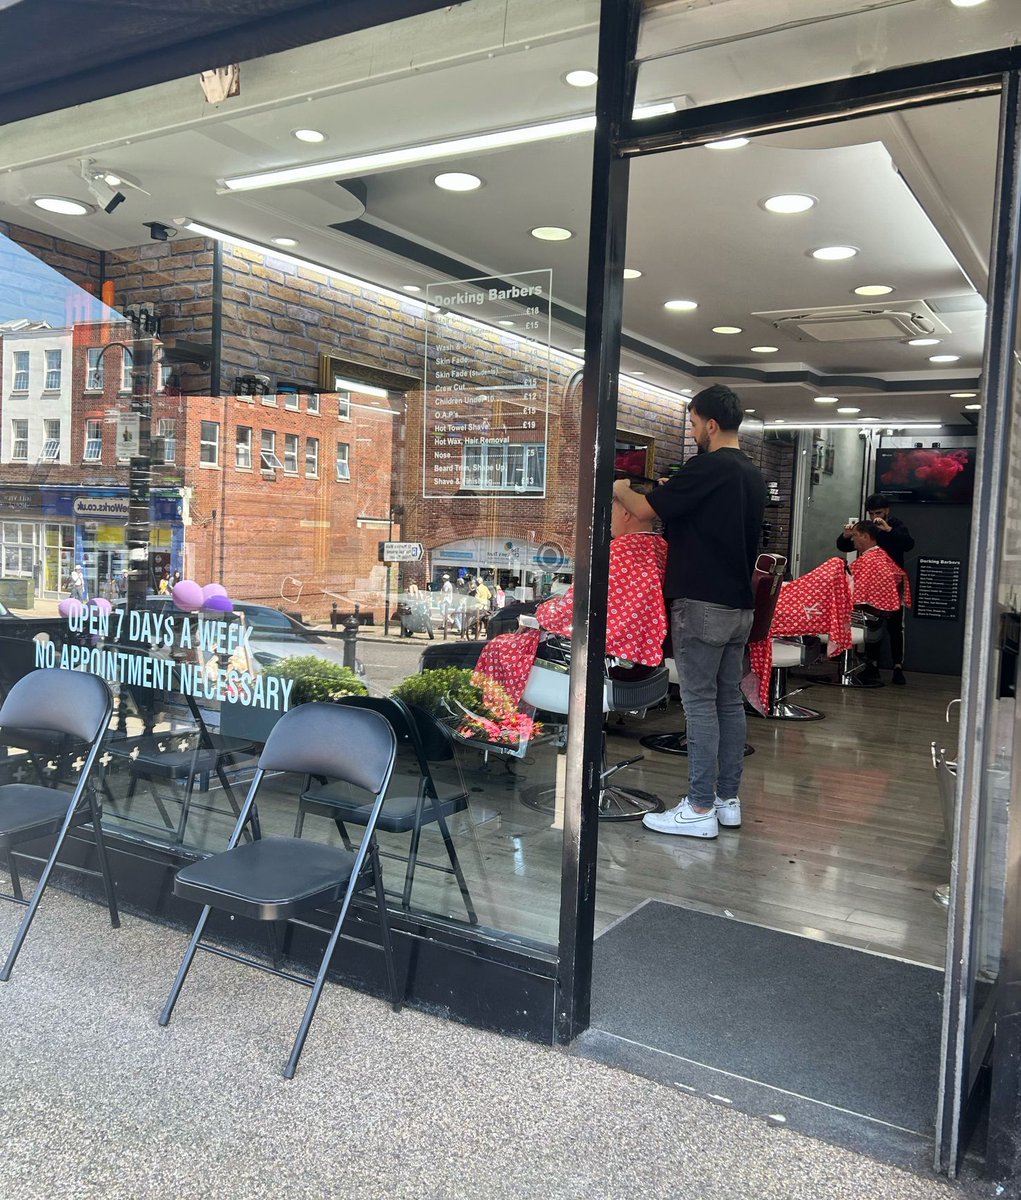 With a steady stream of 5 star reviews it’s easy to see why this popular barbers shop is always busy.

✨ Amazing team. My barber for the last god knows how many years. Every visit I come out 10 years younger!

Visit Dorking Barbers for great service, and great hair!